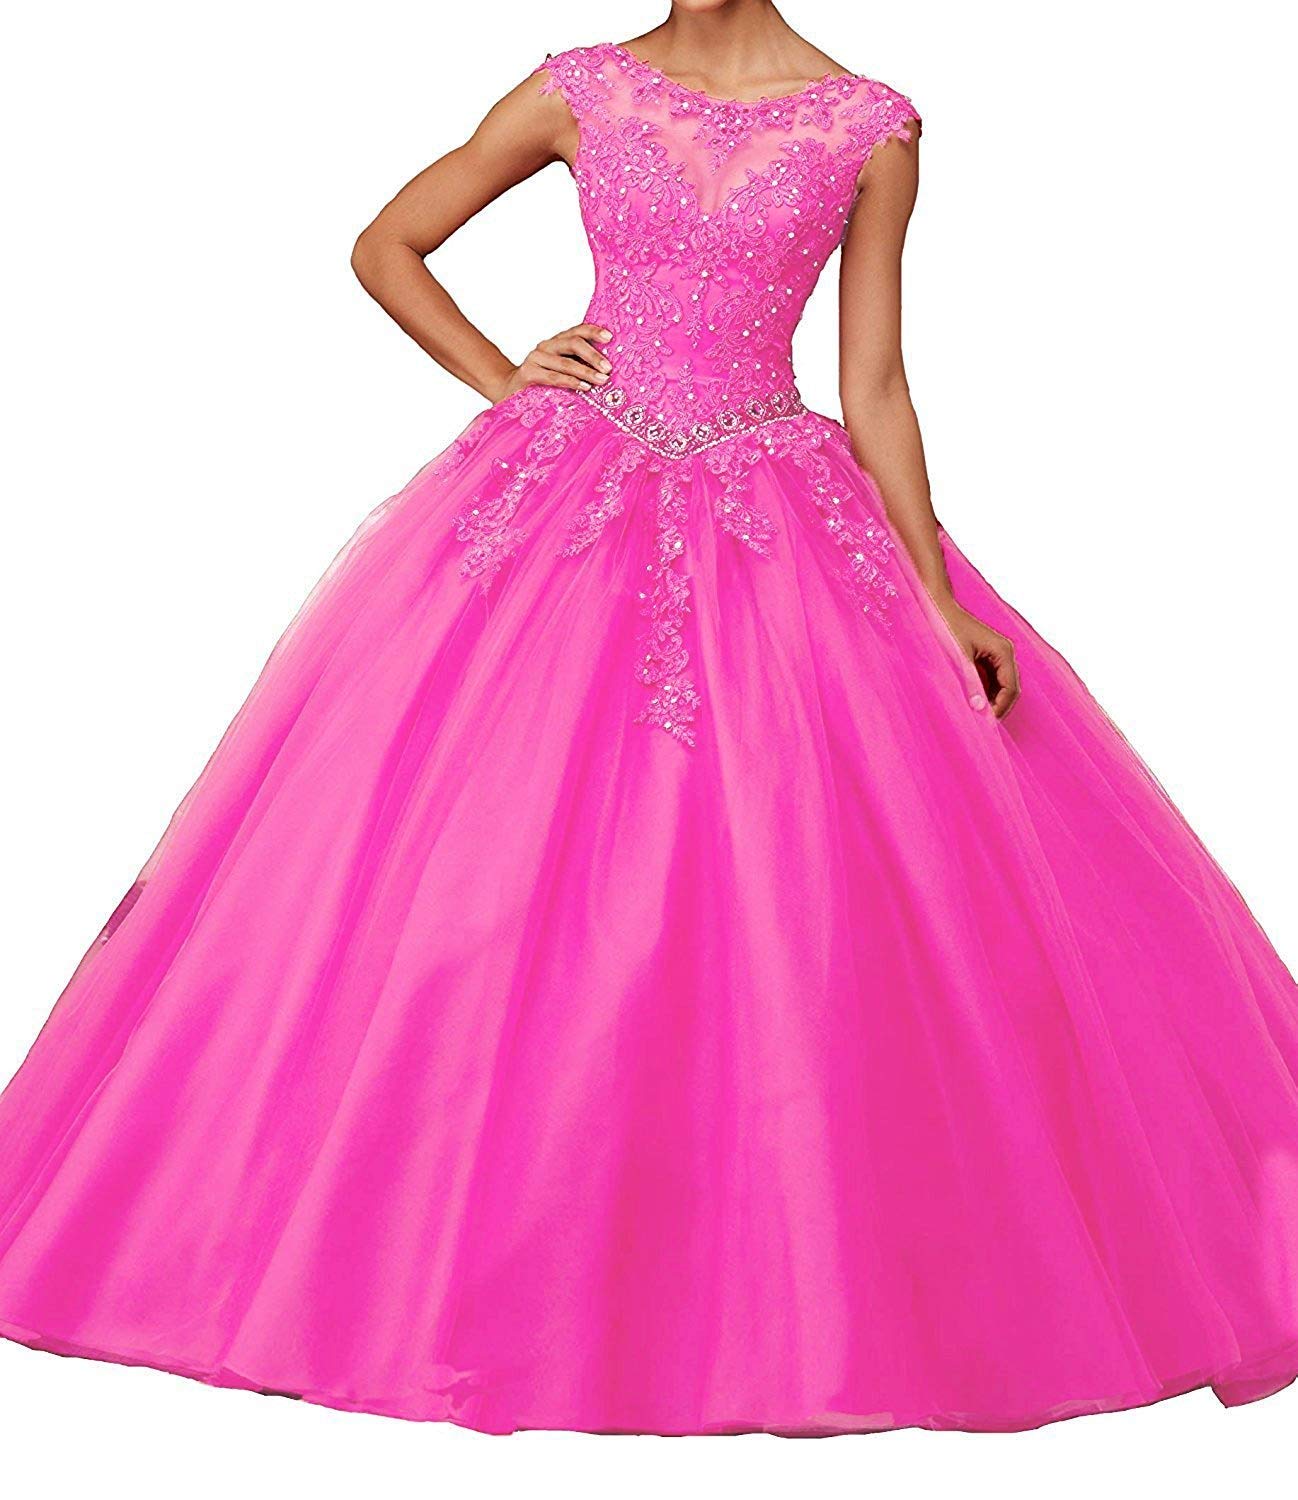 Load image into Gallery viewer, Quinceañera Beaded Scoop Neck Lace Sweet 16 Birthday Dress
